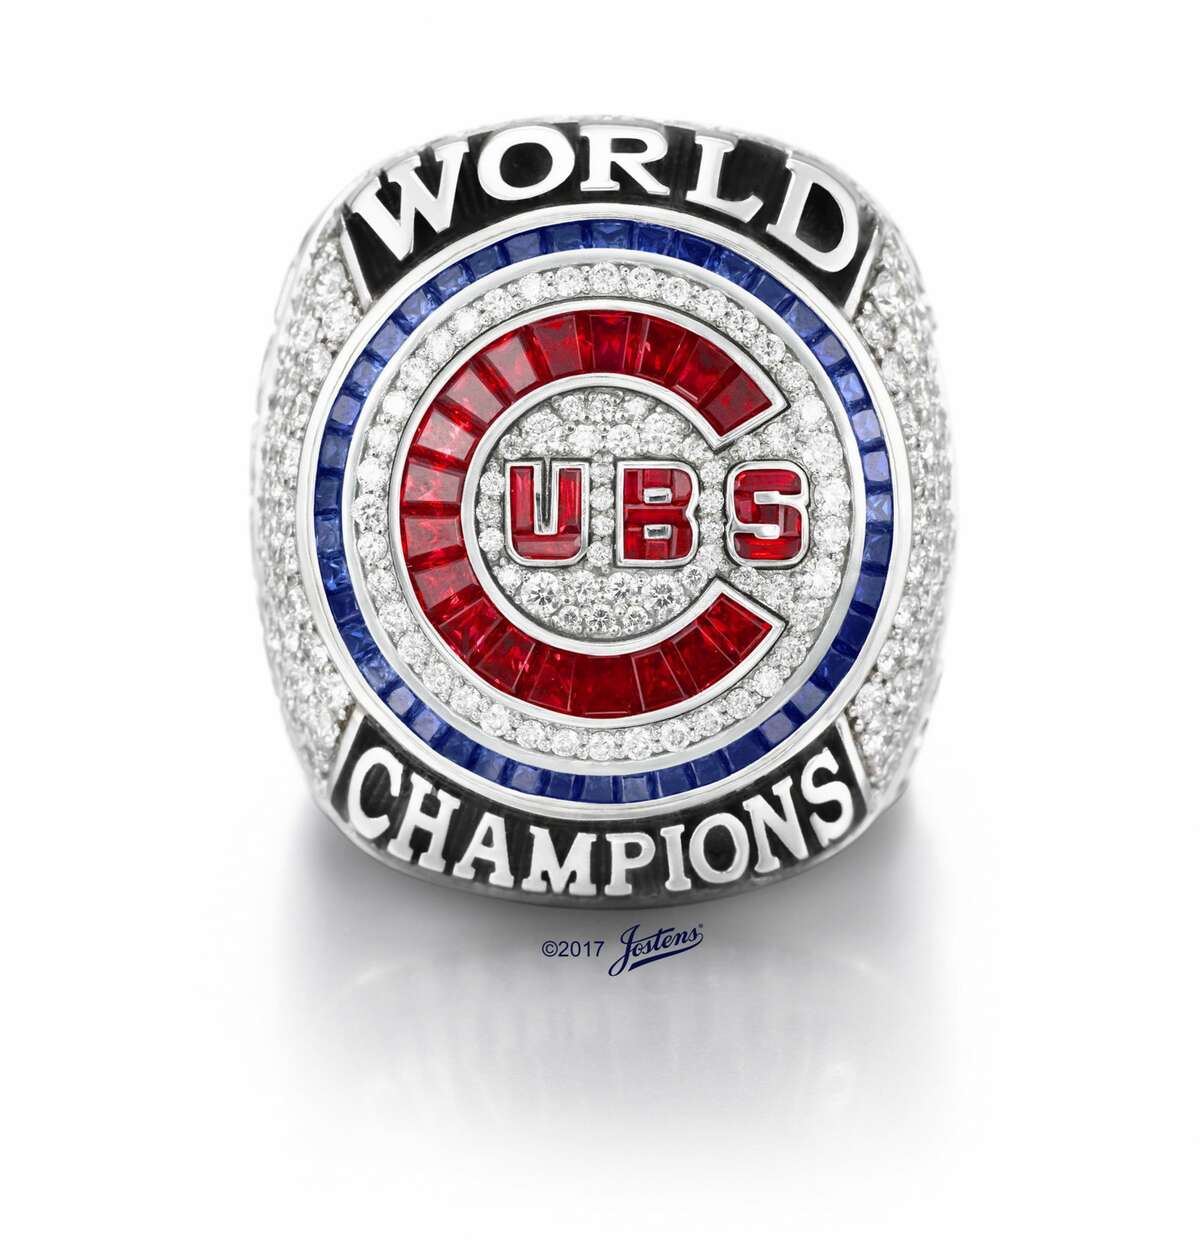 Red Sox receive World Series rings in pregame ceremony (photos